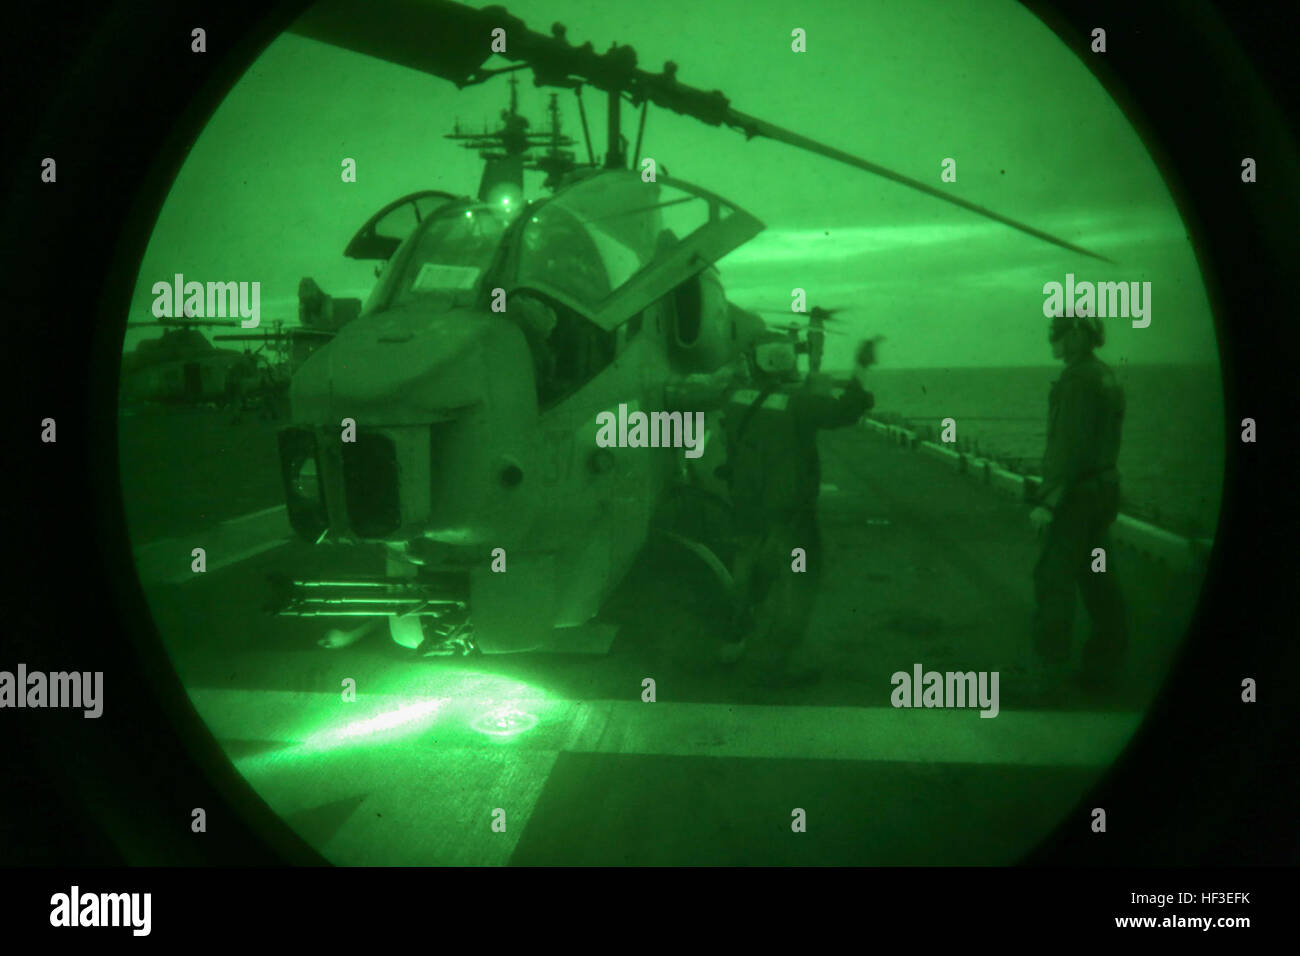 U.S. Marine Lance Cpl. James R. Shugart (left) and Cpl. Kyle C. Lyons (right), helicopter mechanics with the night crew, Marine Medium Tiltrotor Squadron (VMM) 162 (REINFORCED), 26th Marine Expeditionary Unit (MEU), signal to the pilot and co-pilot of an AH-1 Super Cobra to start the engines for a pre-flight maintenance check prior to take-off during an Amphibious Ready Group/Marine Expeditionary Unit Exercise (ARG/MEU-Ex) aboard the USS Kearsarge, June 25, 2015. The 26th MEU and Amphibious Squadron 4 are conducting an ARG/MEU-Ex in preparation for their deployment to the 5th and 6th Fleet are Stock Photo